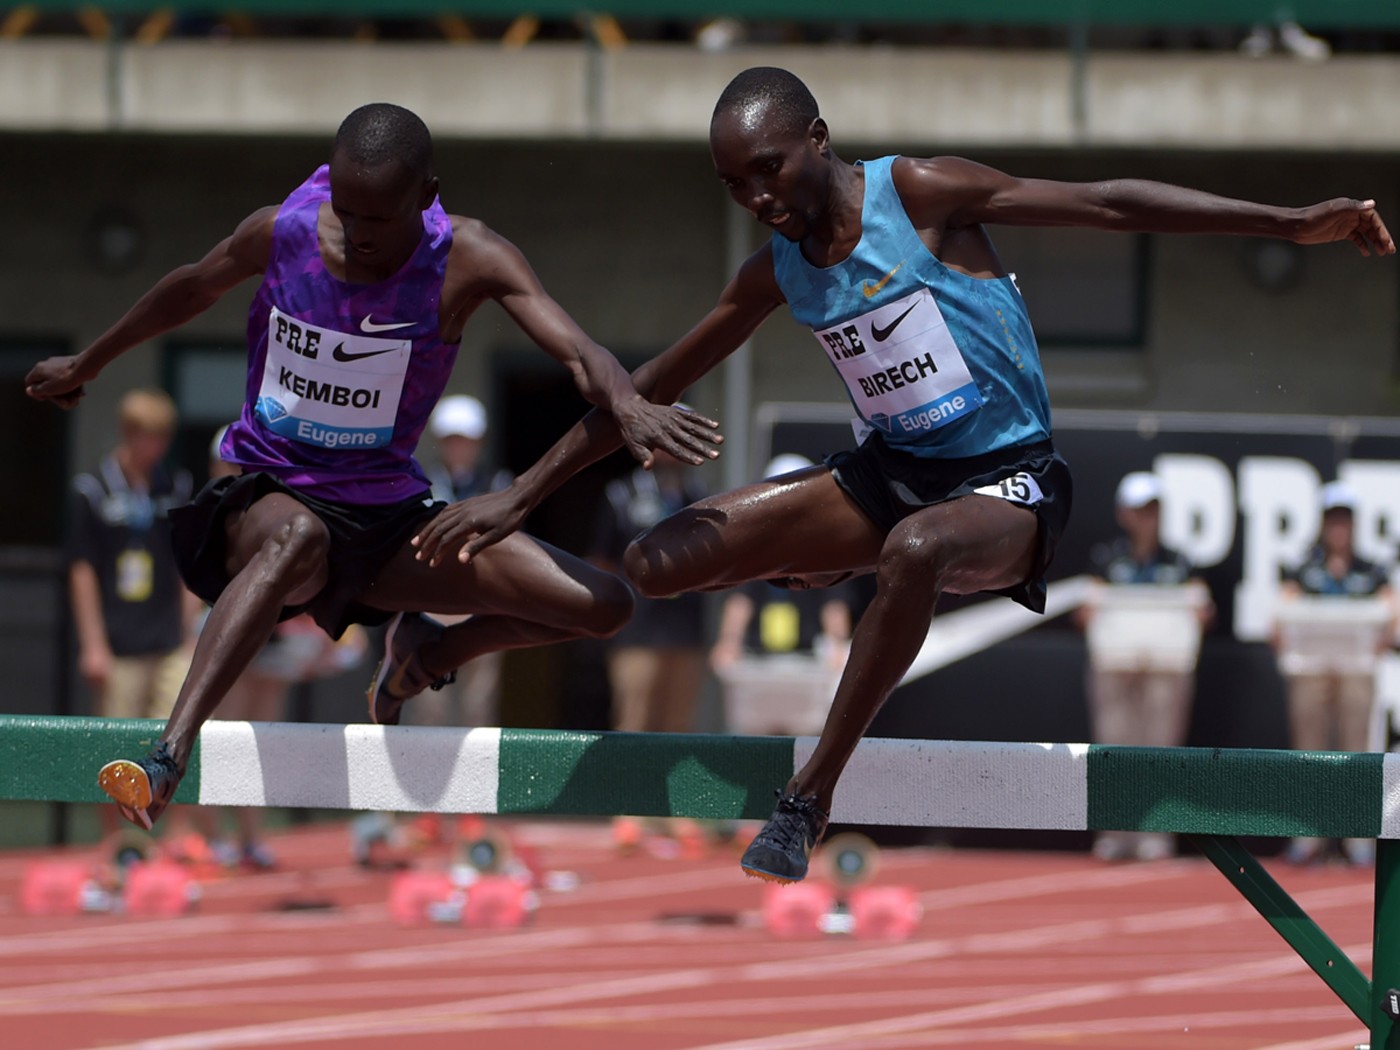 Kenyans Ezekiel Kemboi and Jairus Birech will renew their rivalry in the men's 3000m S/C at the IAAF Diamond League Doha 2016 meeting on 6 May.